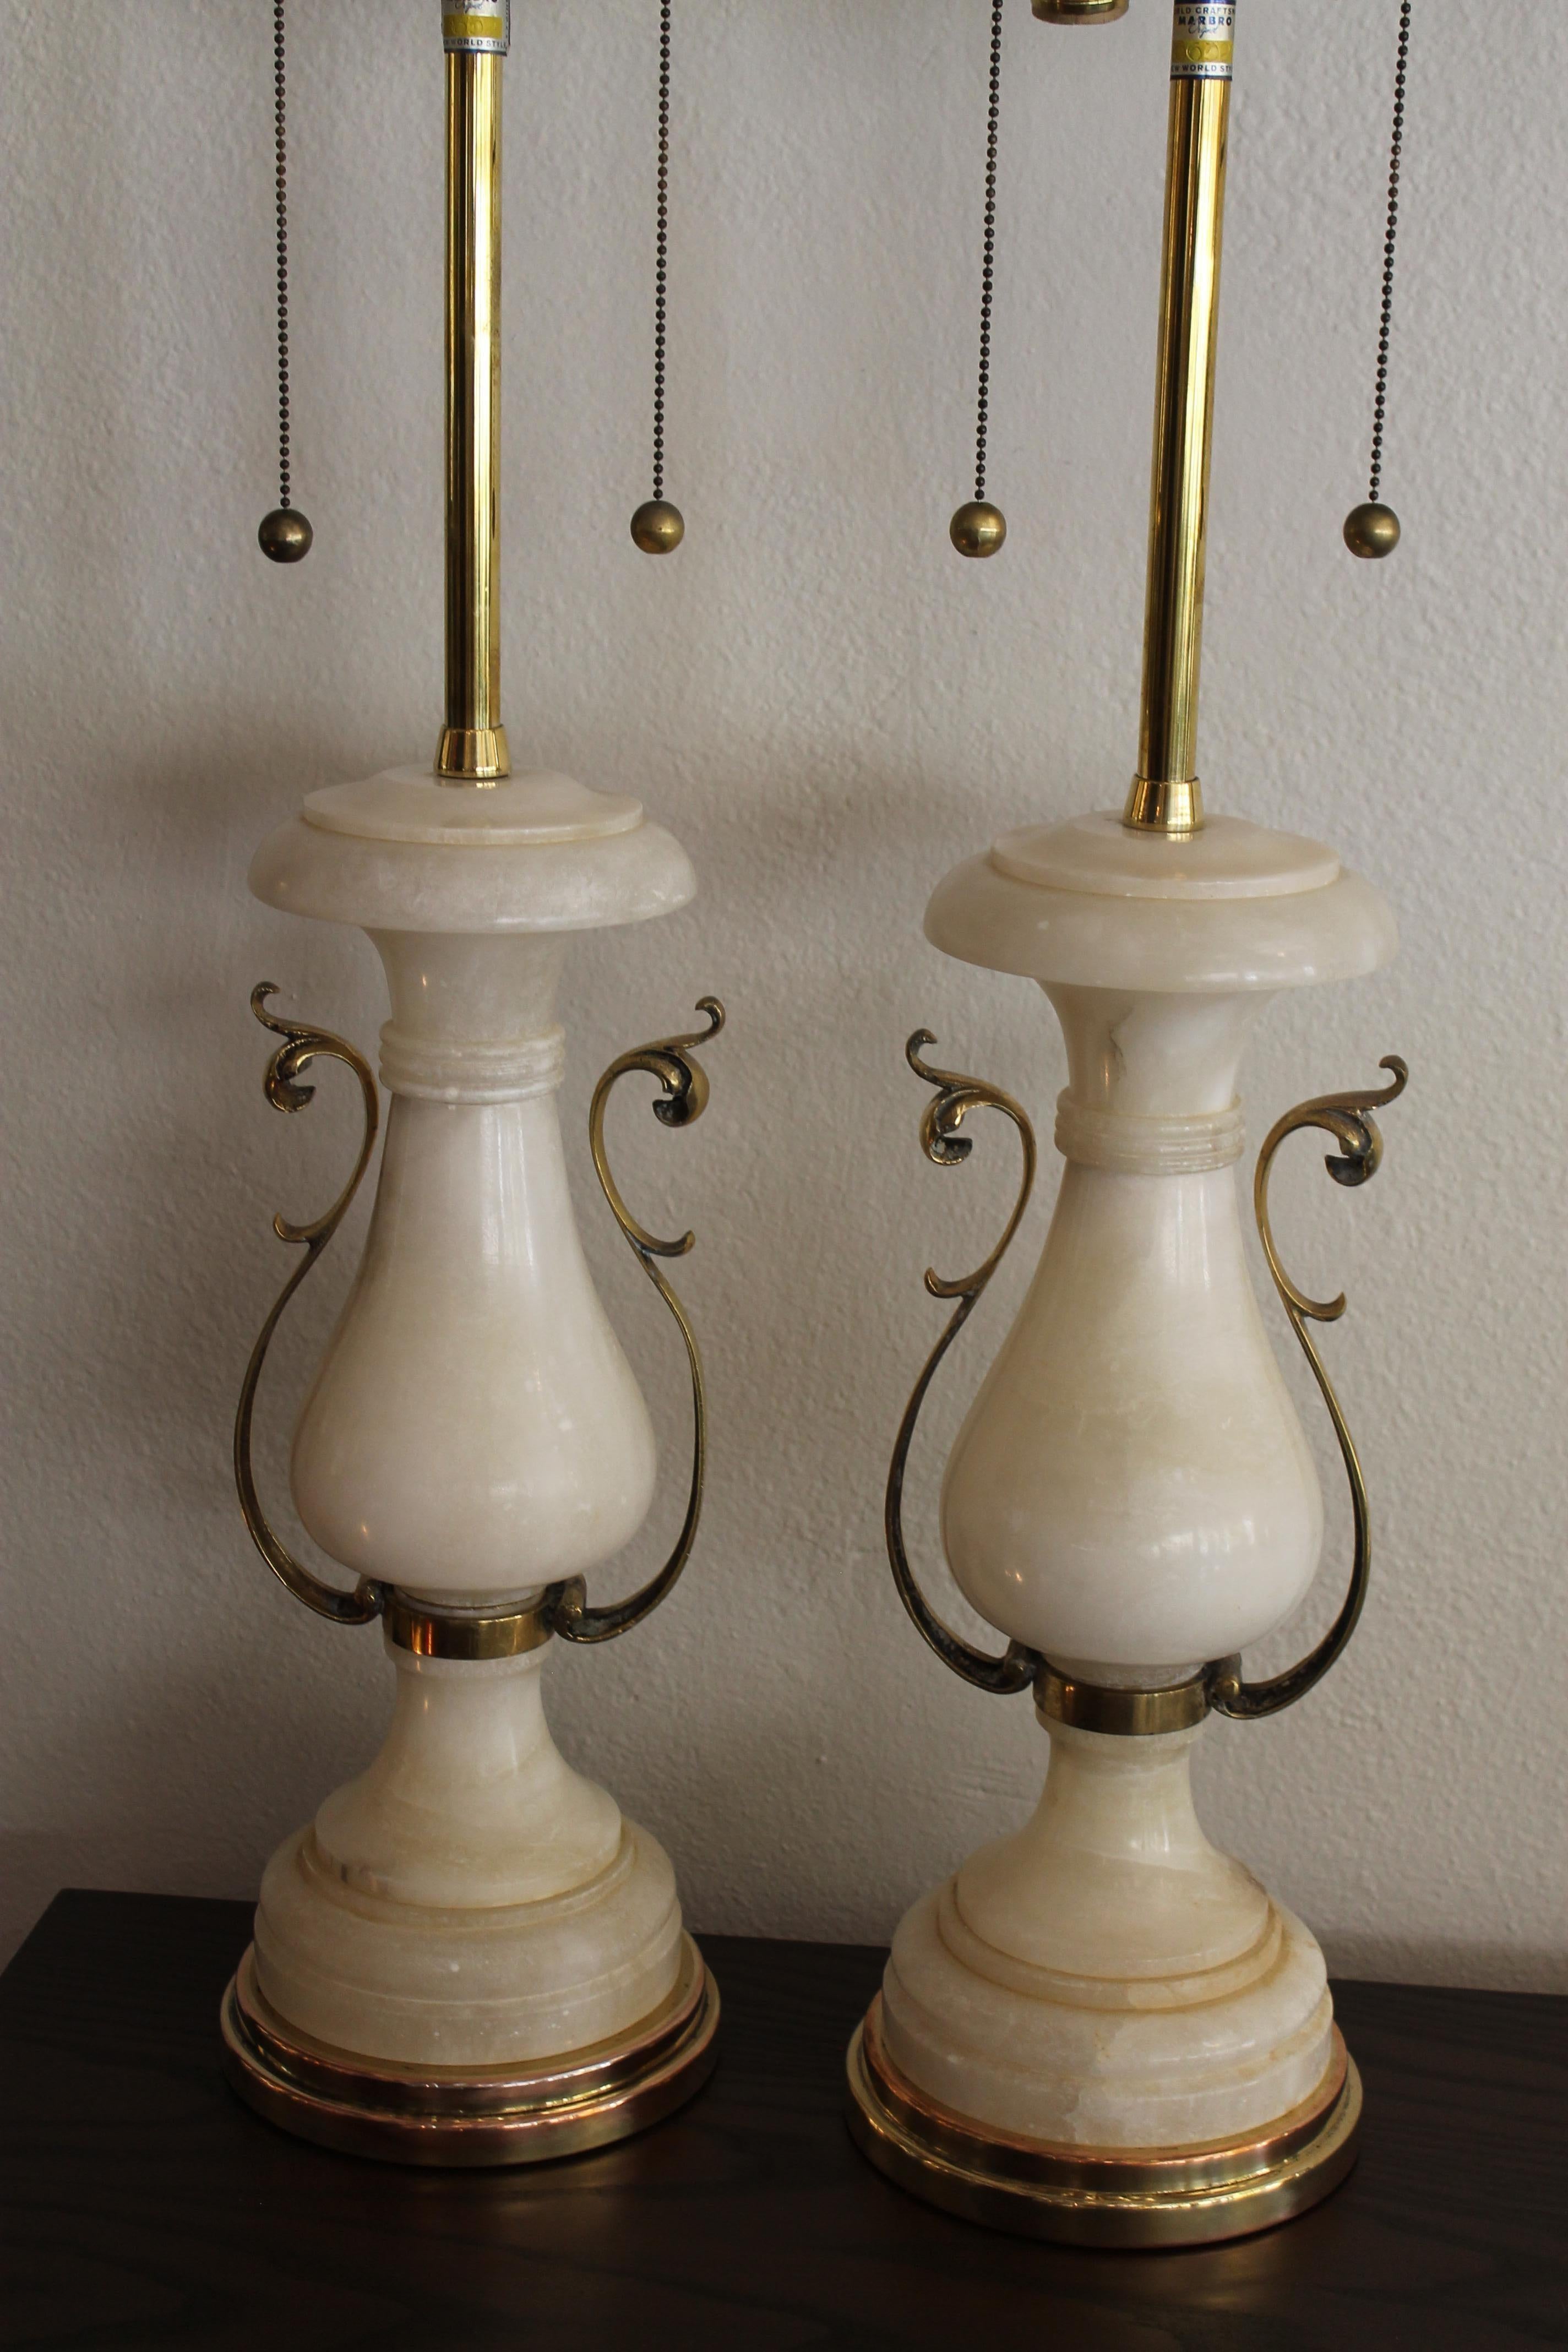 Pair of alabaster lamps by The Marbro Lamp Company. Each lamp measures: 7.5” diameter (base), 38.25” high from base to the top of finial. Alabaster portions are 17.5” high. Lamps have been professionally rewired.
     